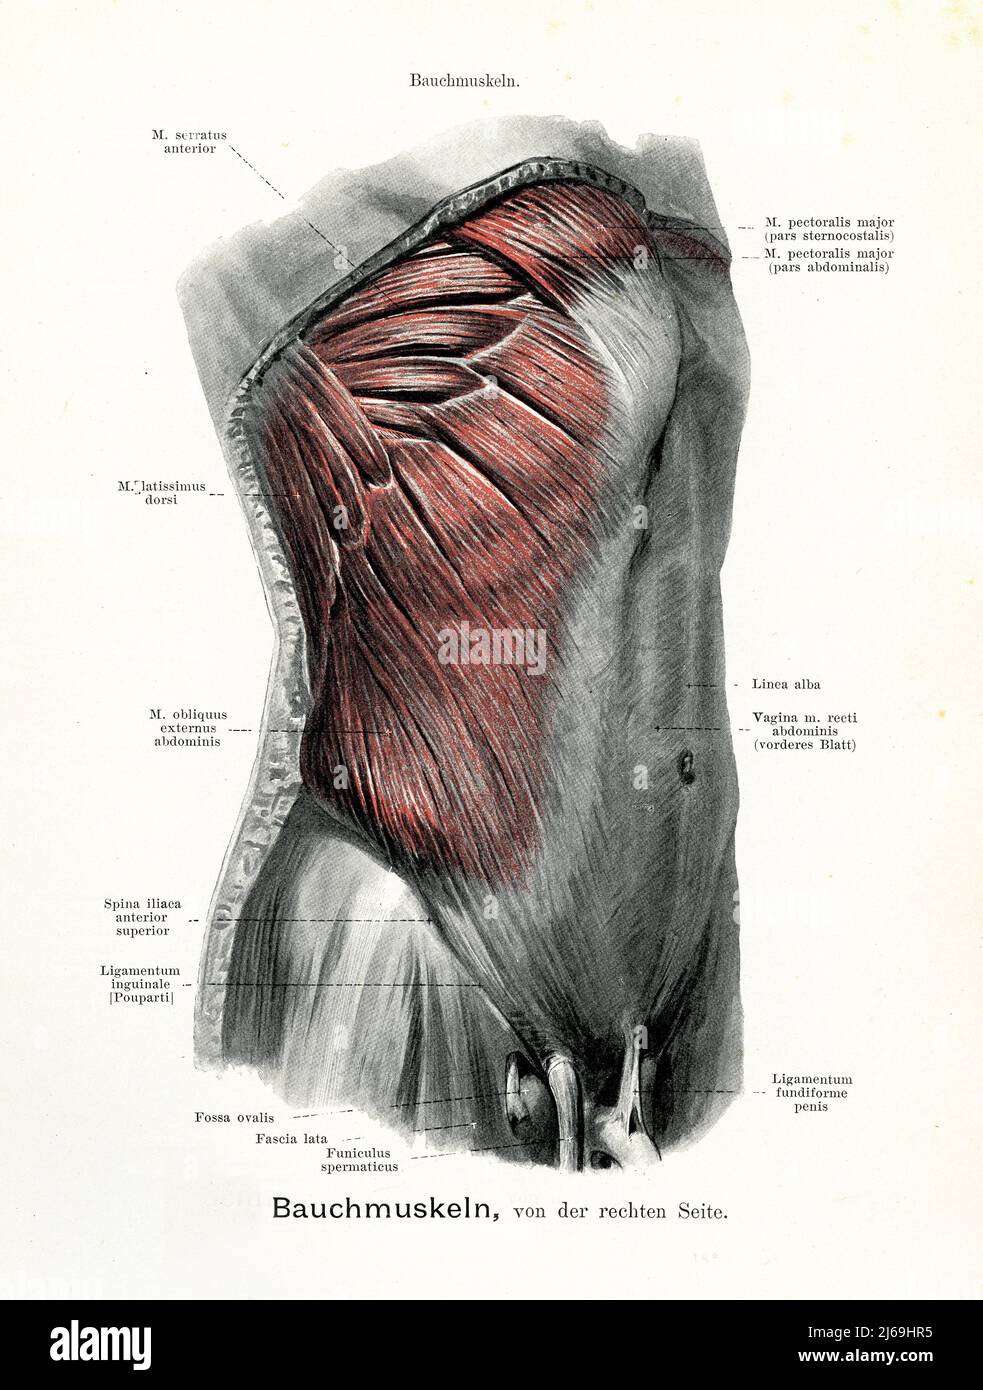 Vintage illustration of anatomy of the abdominal muscles of the right side of the torso, with German anatomical descriptions Stock Photo